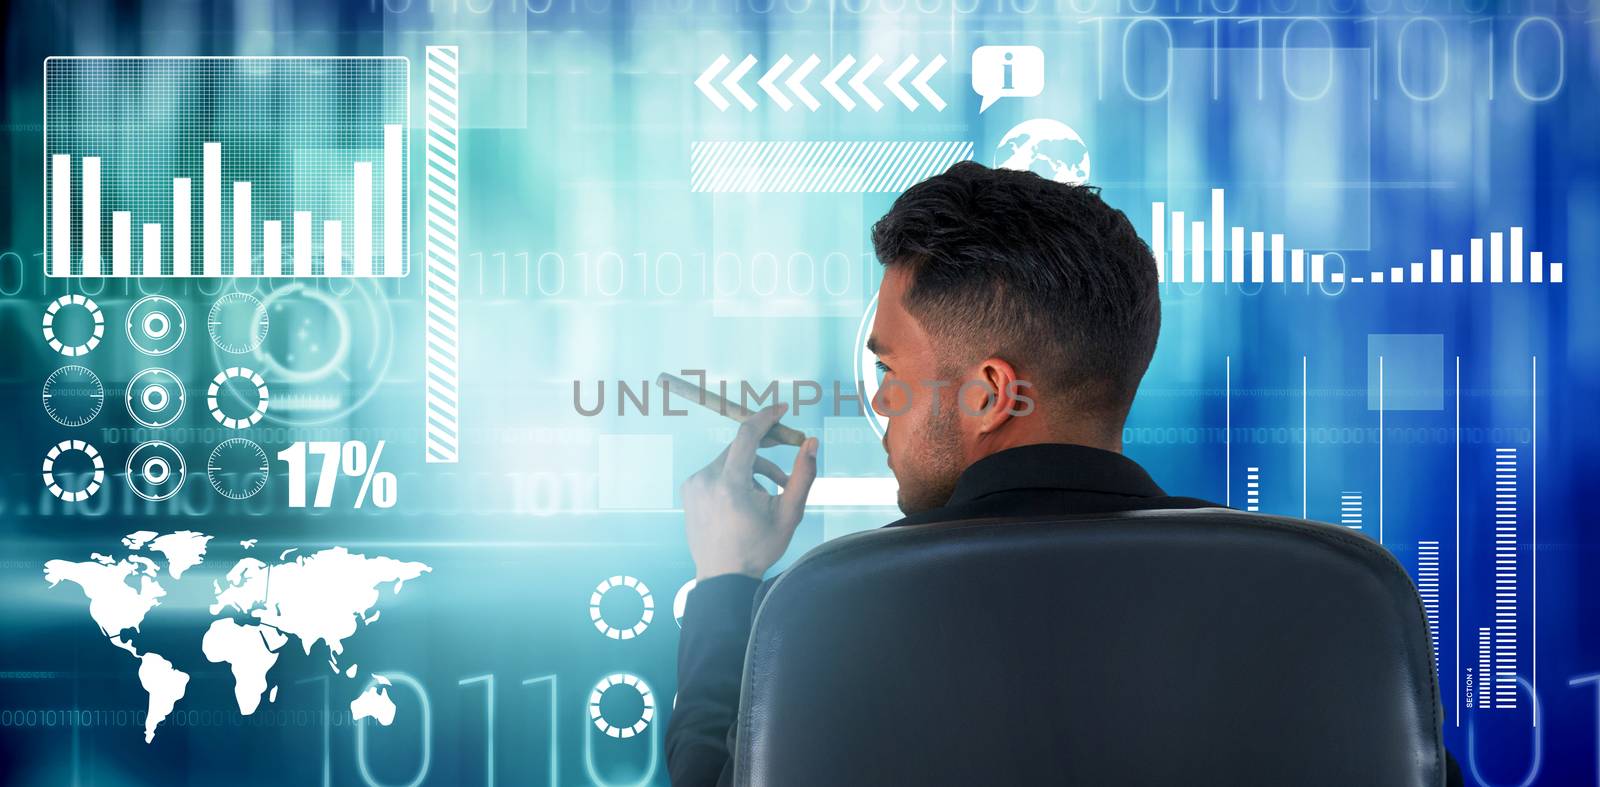 Rear view of male executive holding cigar against blue technology design with binary code